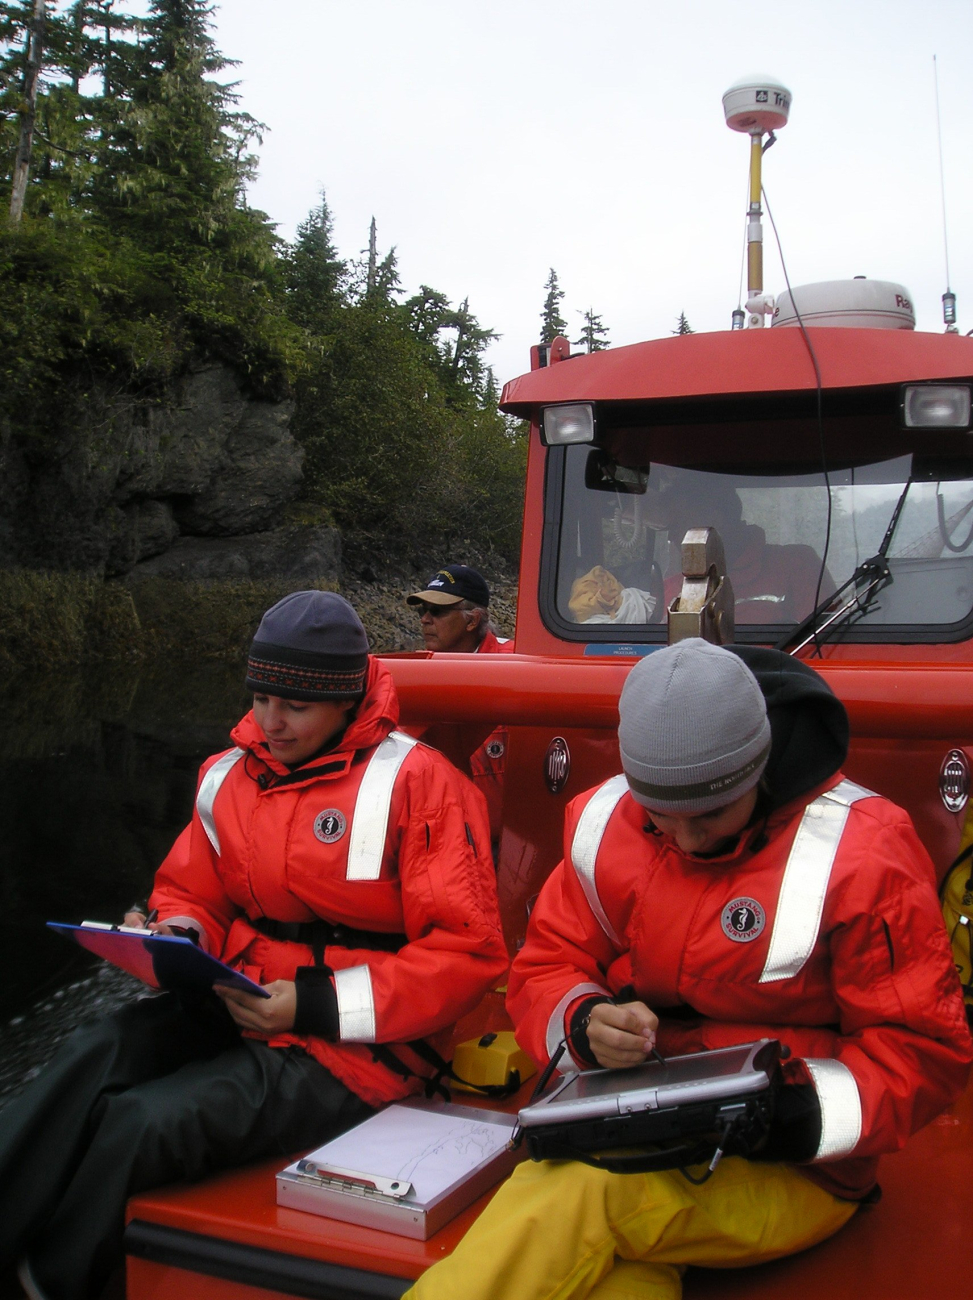 Small work boat outfitted with Trimble GPS GPS receiver used in shorelinemapping